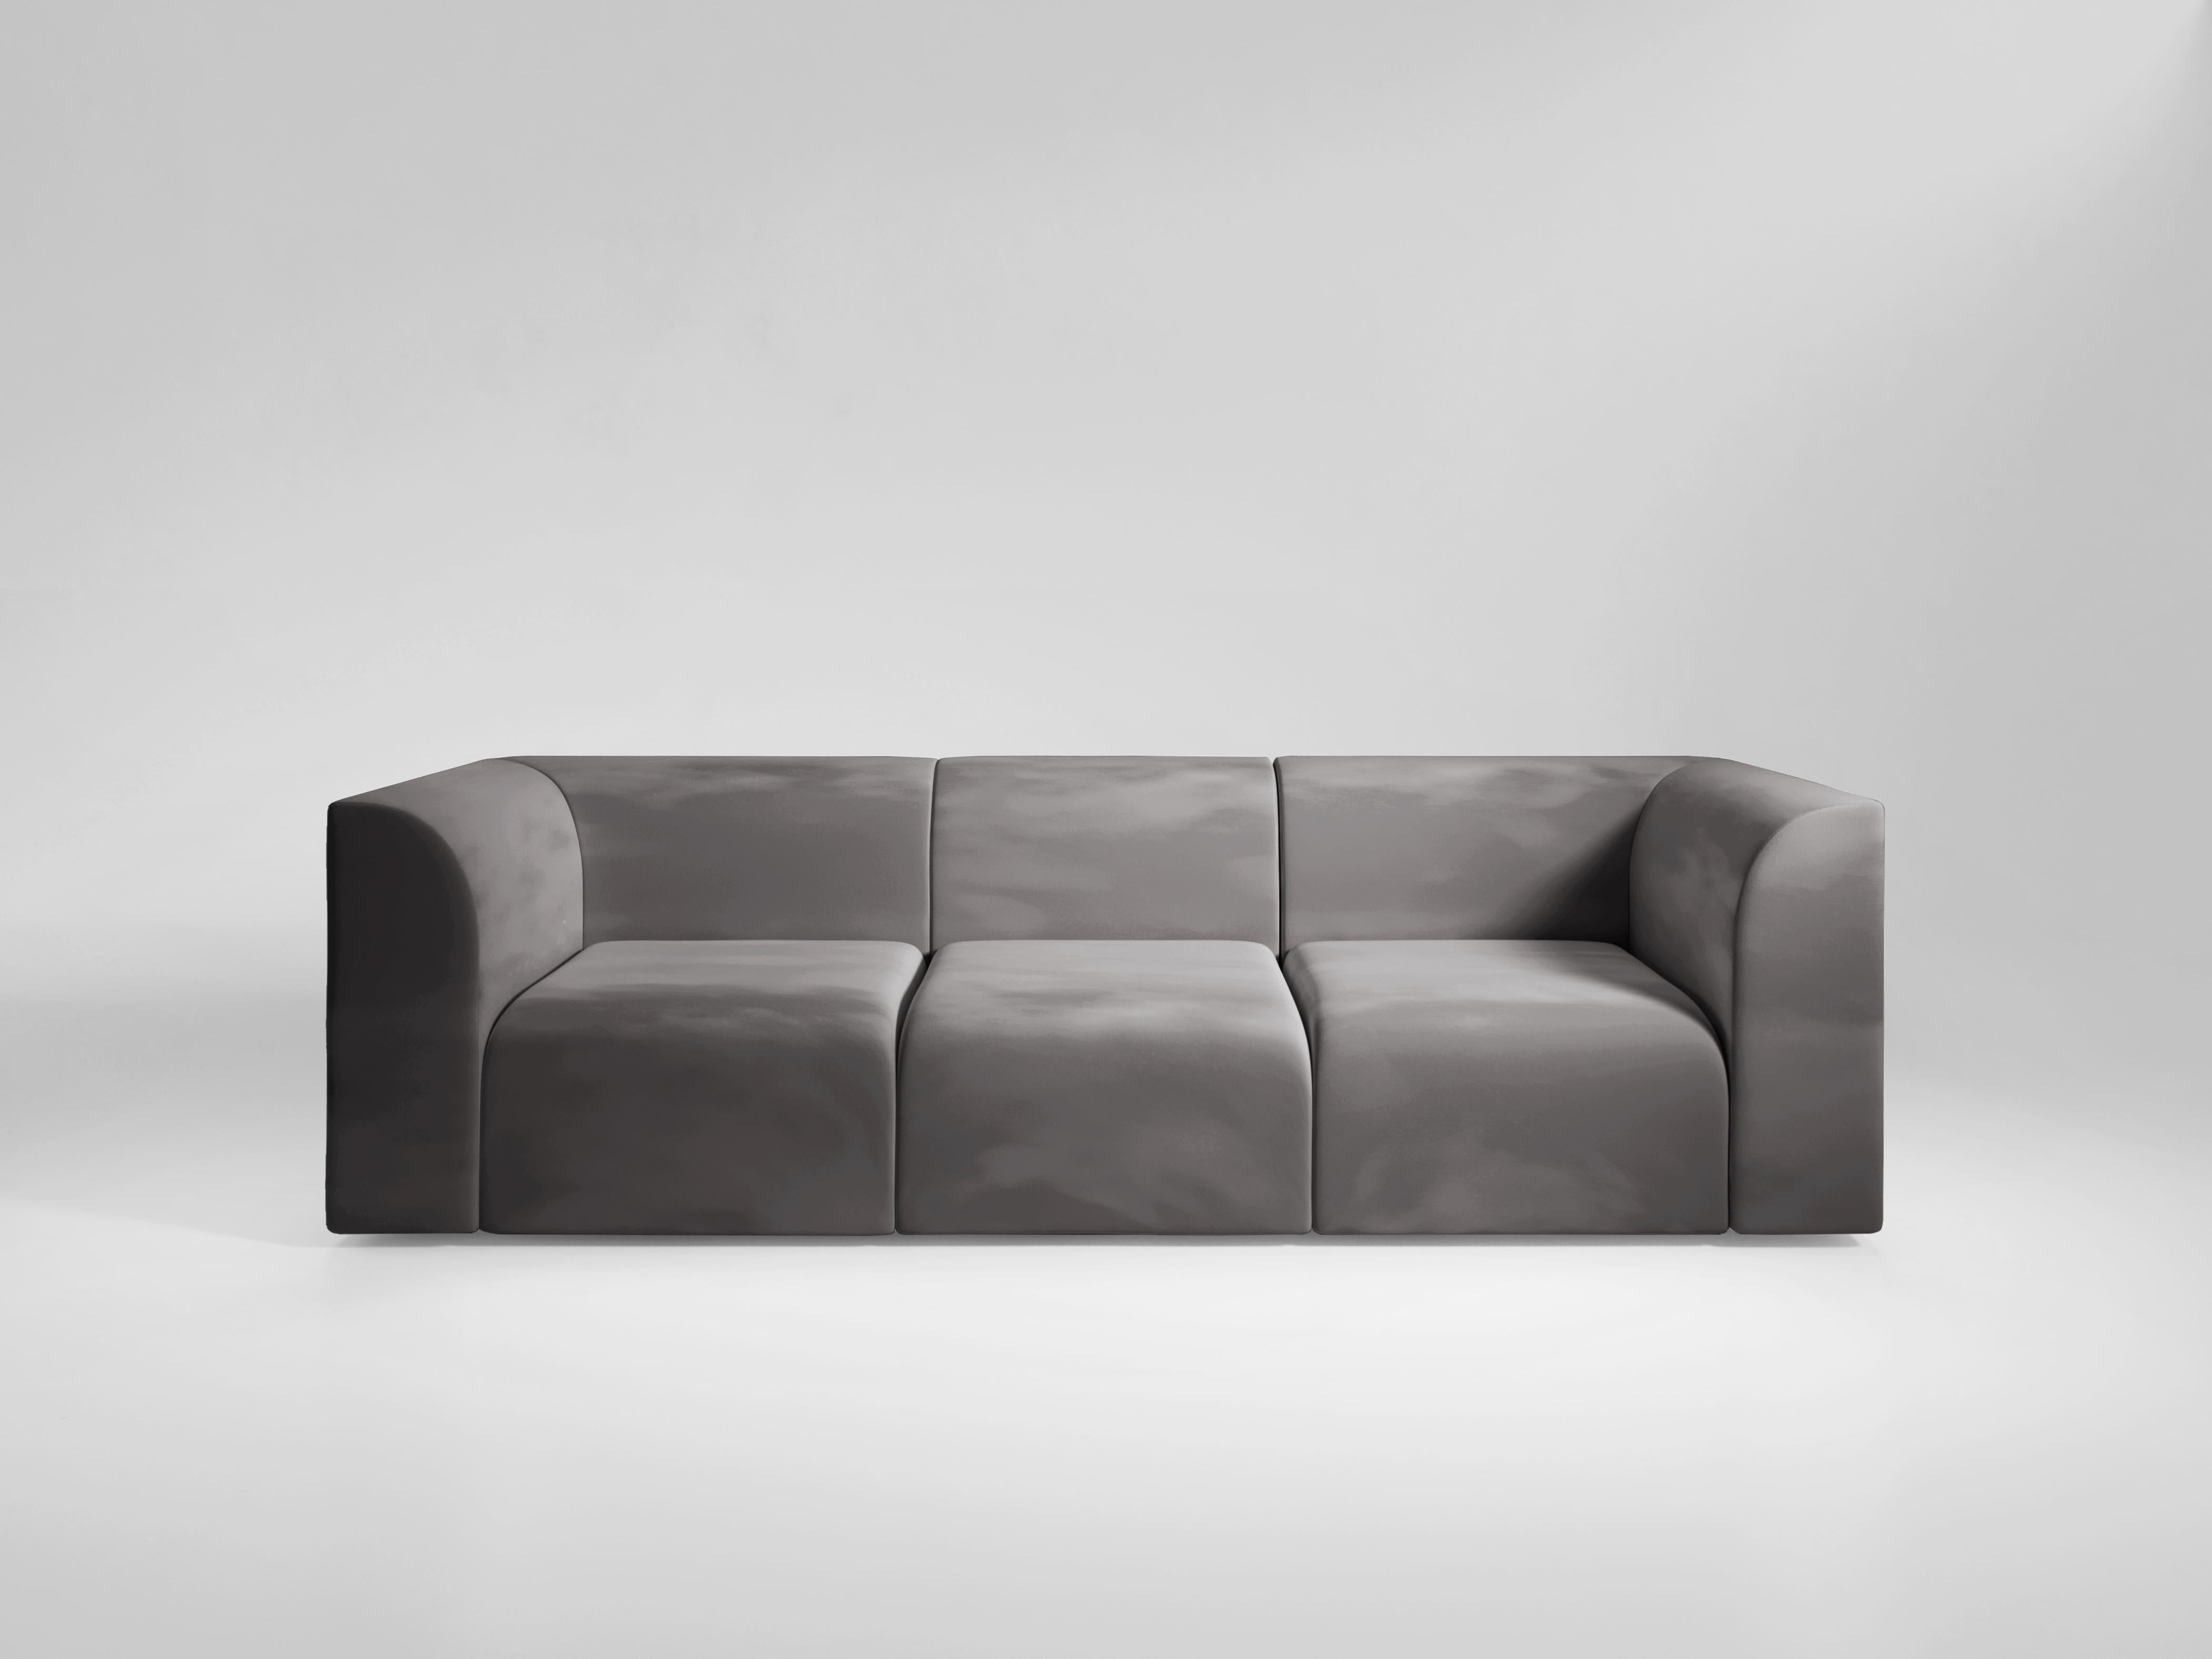 A modular sofa designed as a response to a staple of Romanesque Architecture. Designed to subtly explore the contrast between the inside and outside of a sofa, the outer sides are square and sharp, whereas the inside corners are smooth and curve